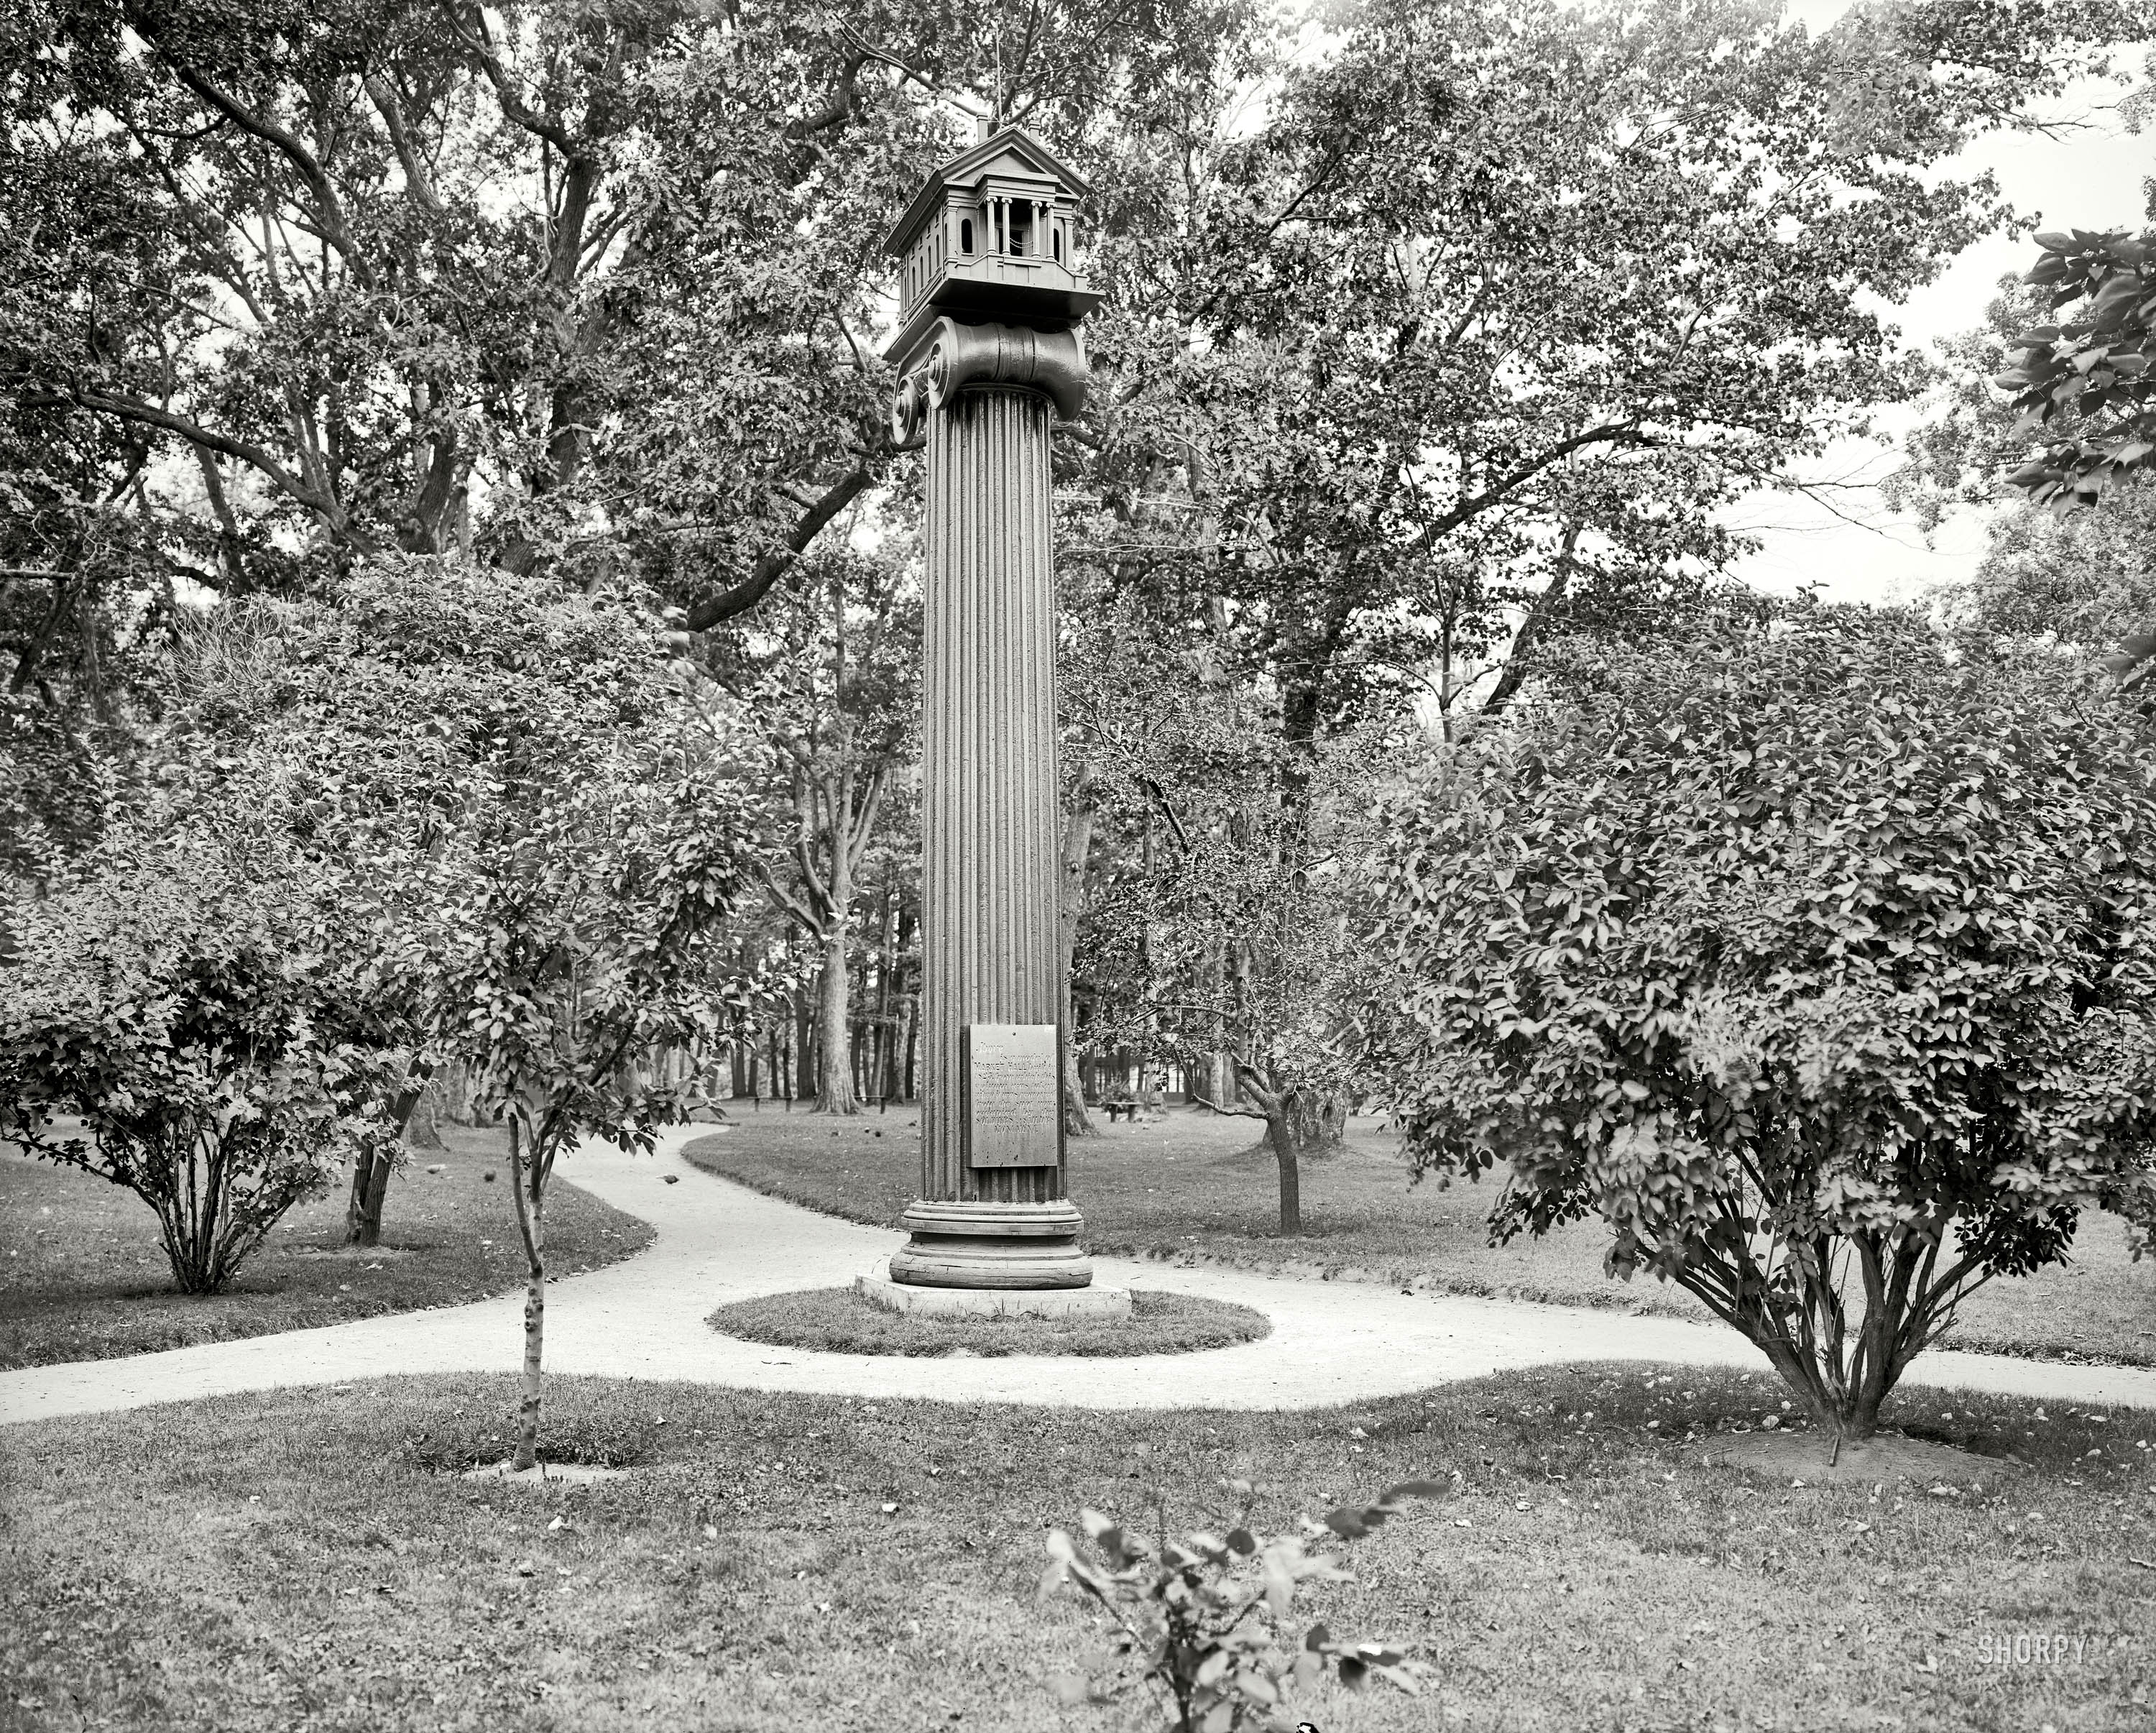 Portland Harbor, Maine, circa 1910. "Memorial column, Deering Park." This memorial to Market Hall in Portland, using one of the razed building's columns, probably provoked its shares of snickers, not to mention nests. 8x10 inch dry plate glass negative, Detroit Publishing Company. View full size.